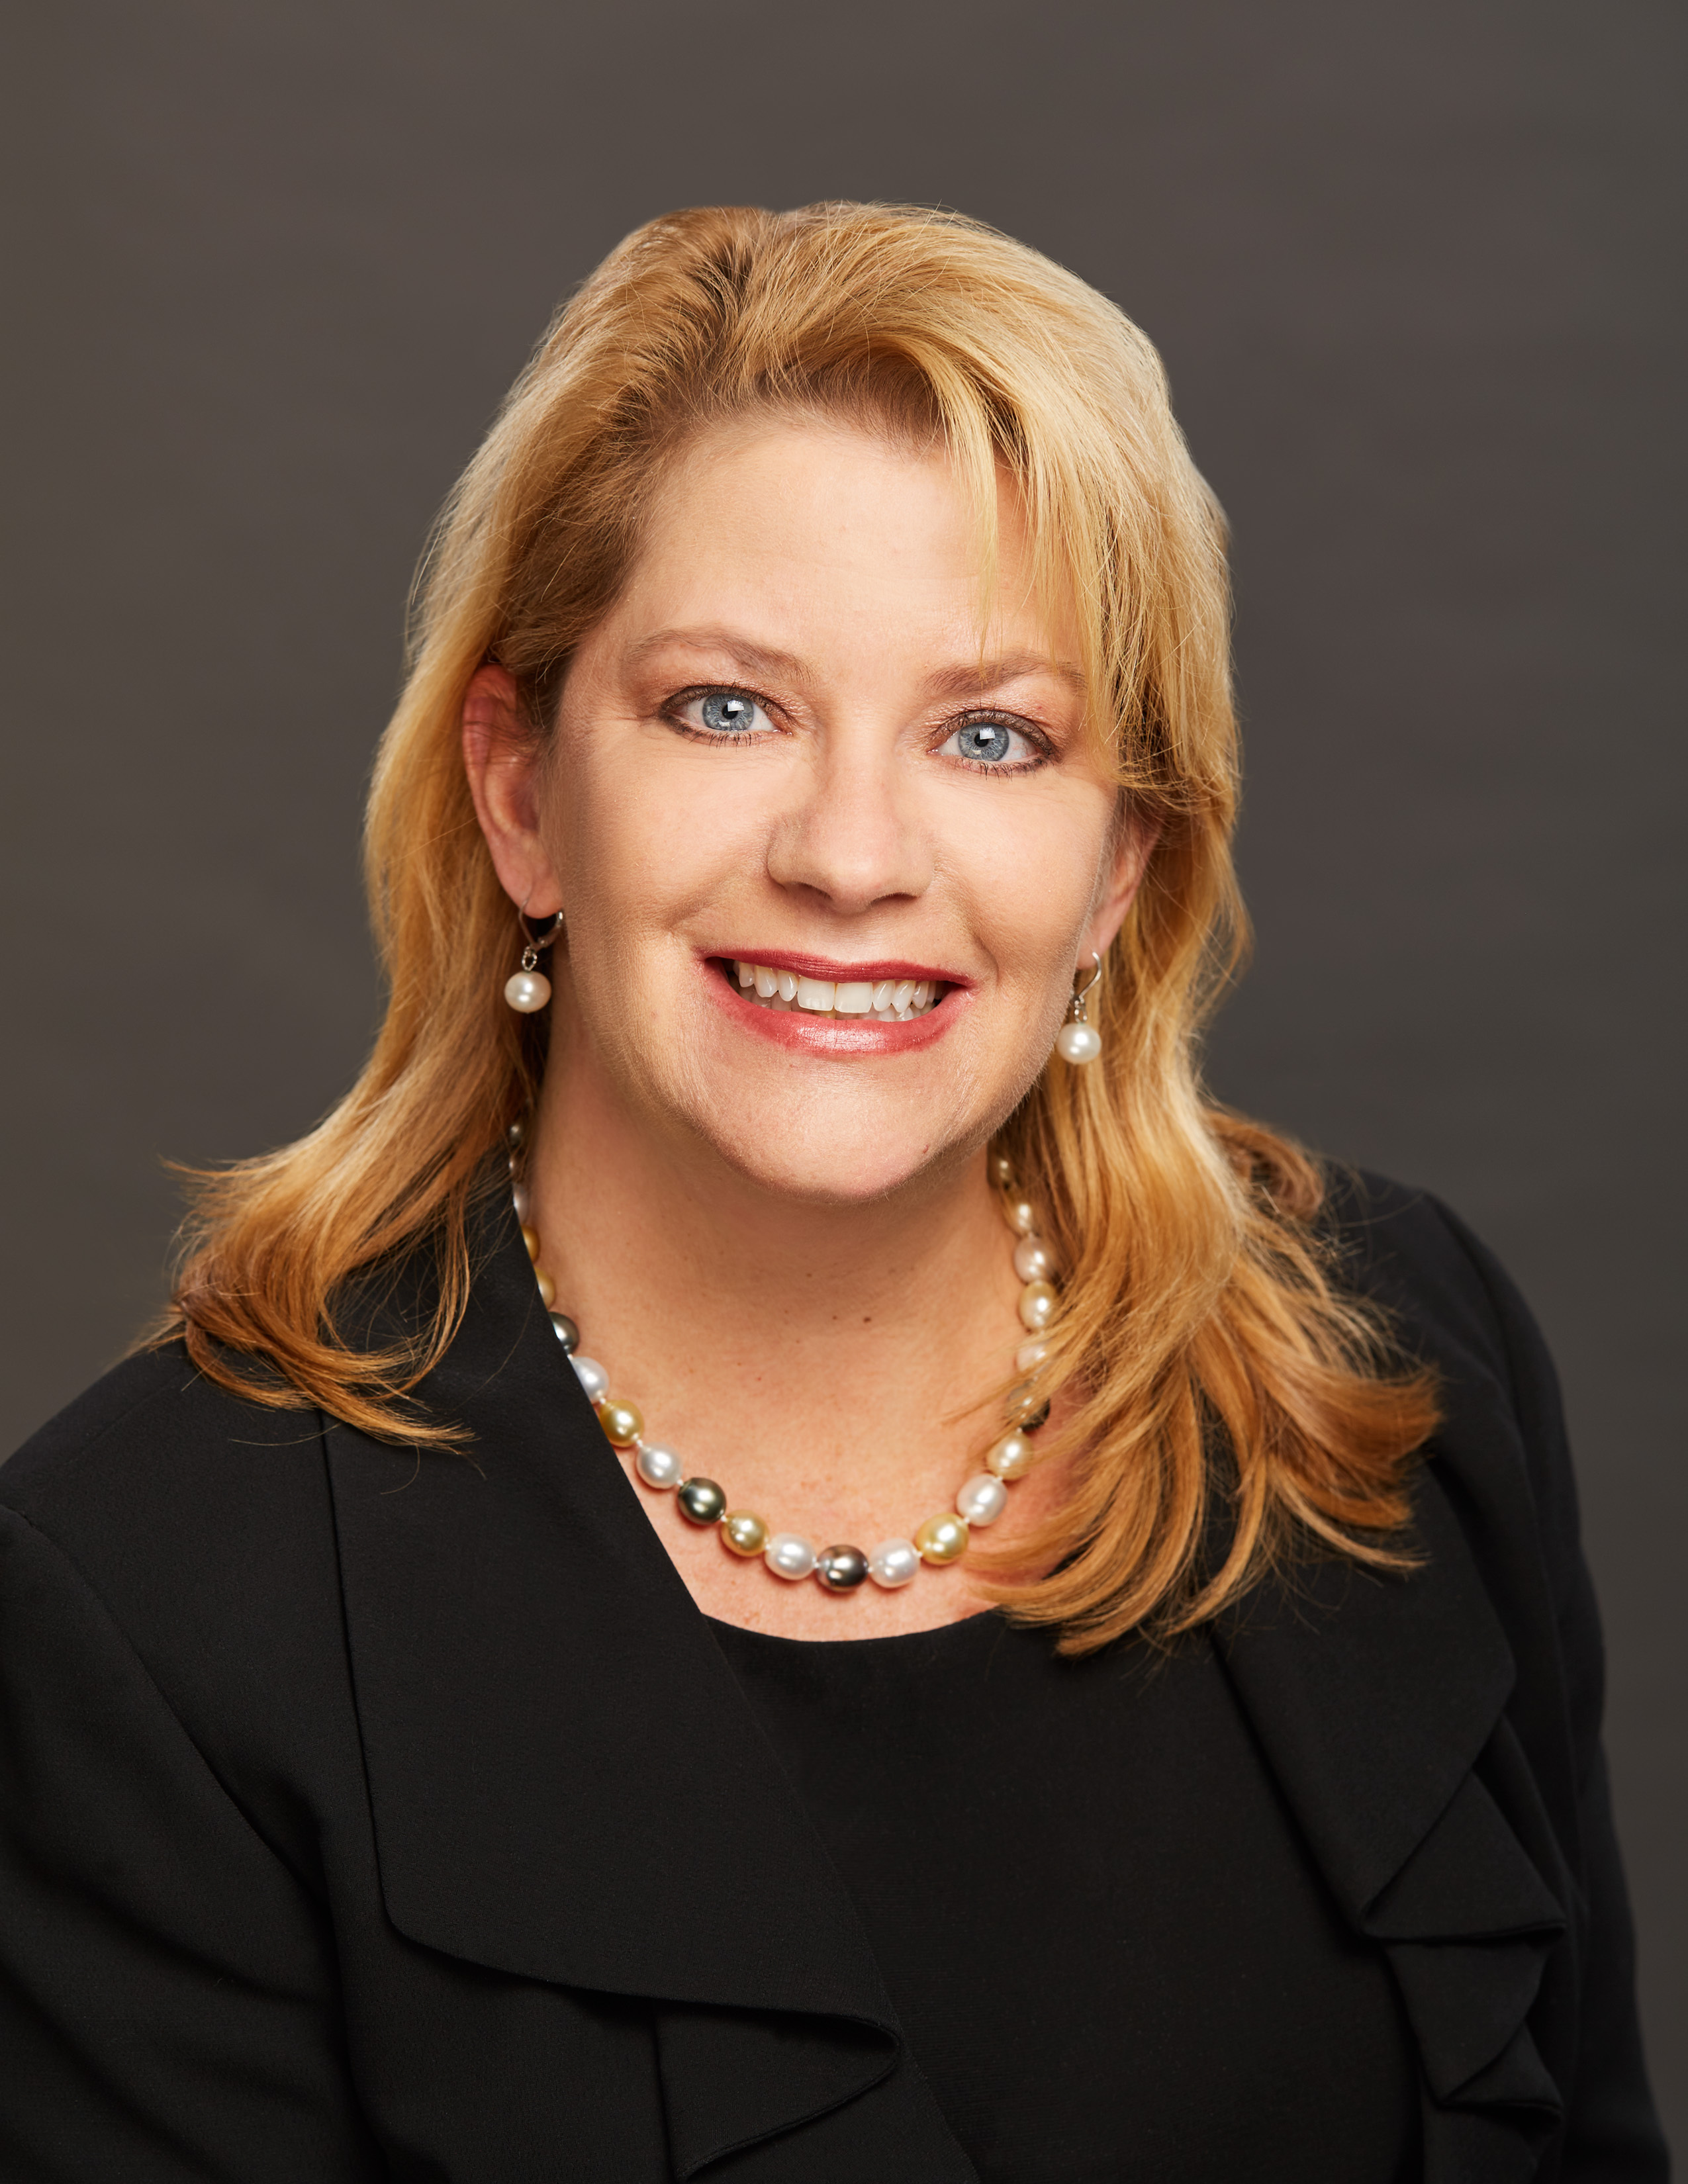 Stearns Lending LLC has announced that Michelle Greenstreet has been appointed Chief Administrative Officer, responsible for human resources, facilities, marketing and communications